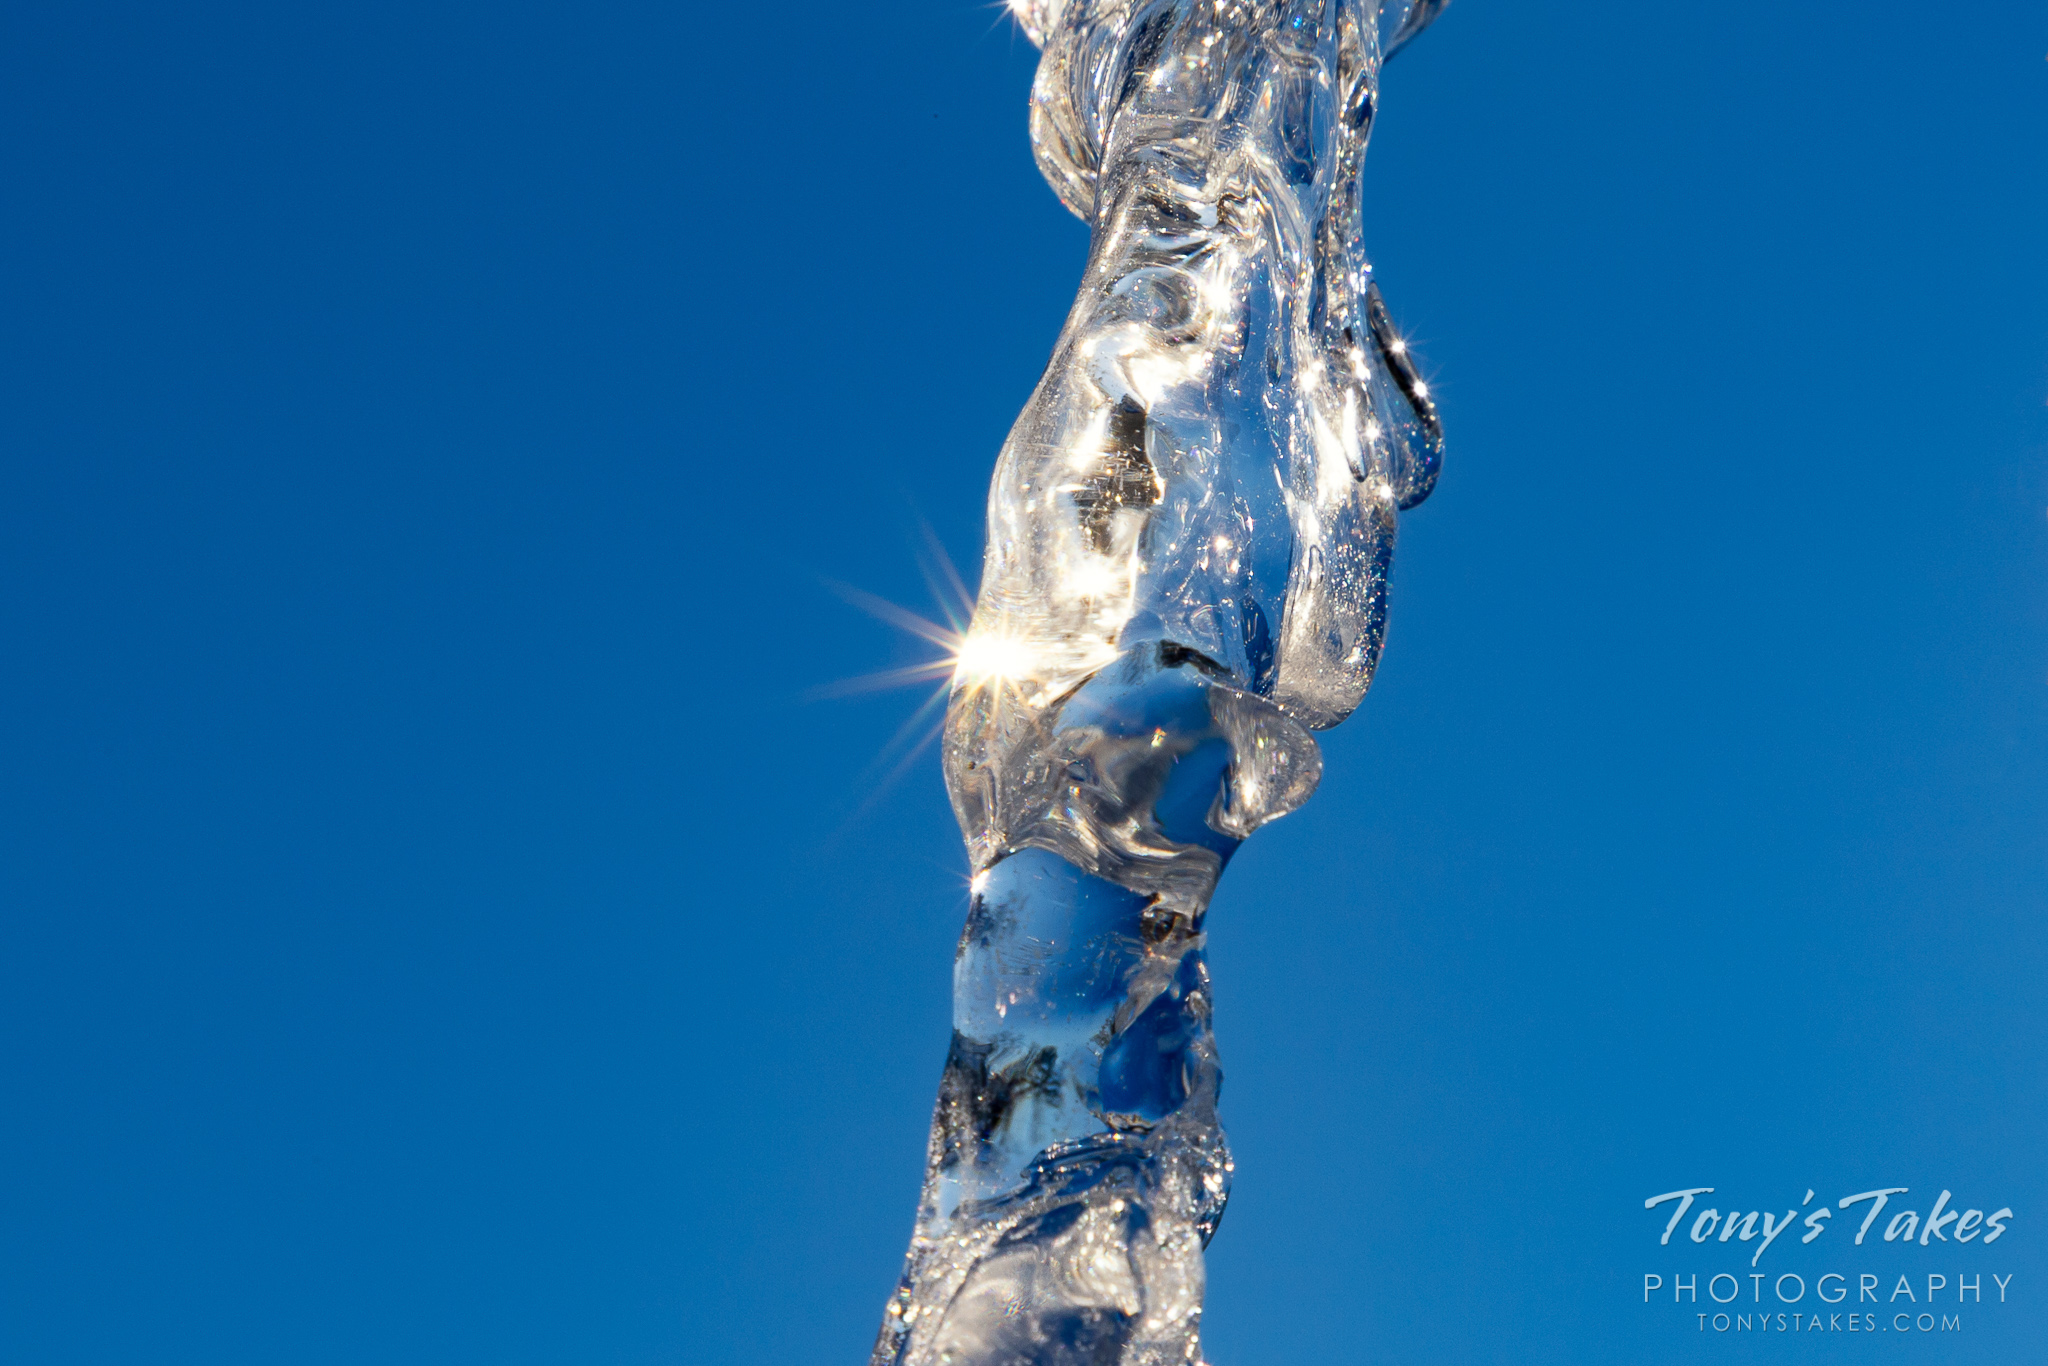 Icicles shine against a deep blue sky in Colorado. (© Tony’s Takes)